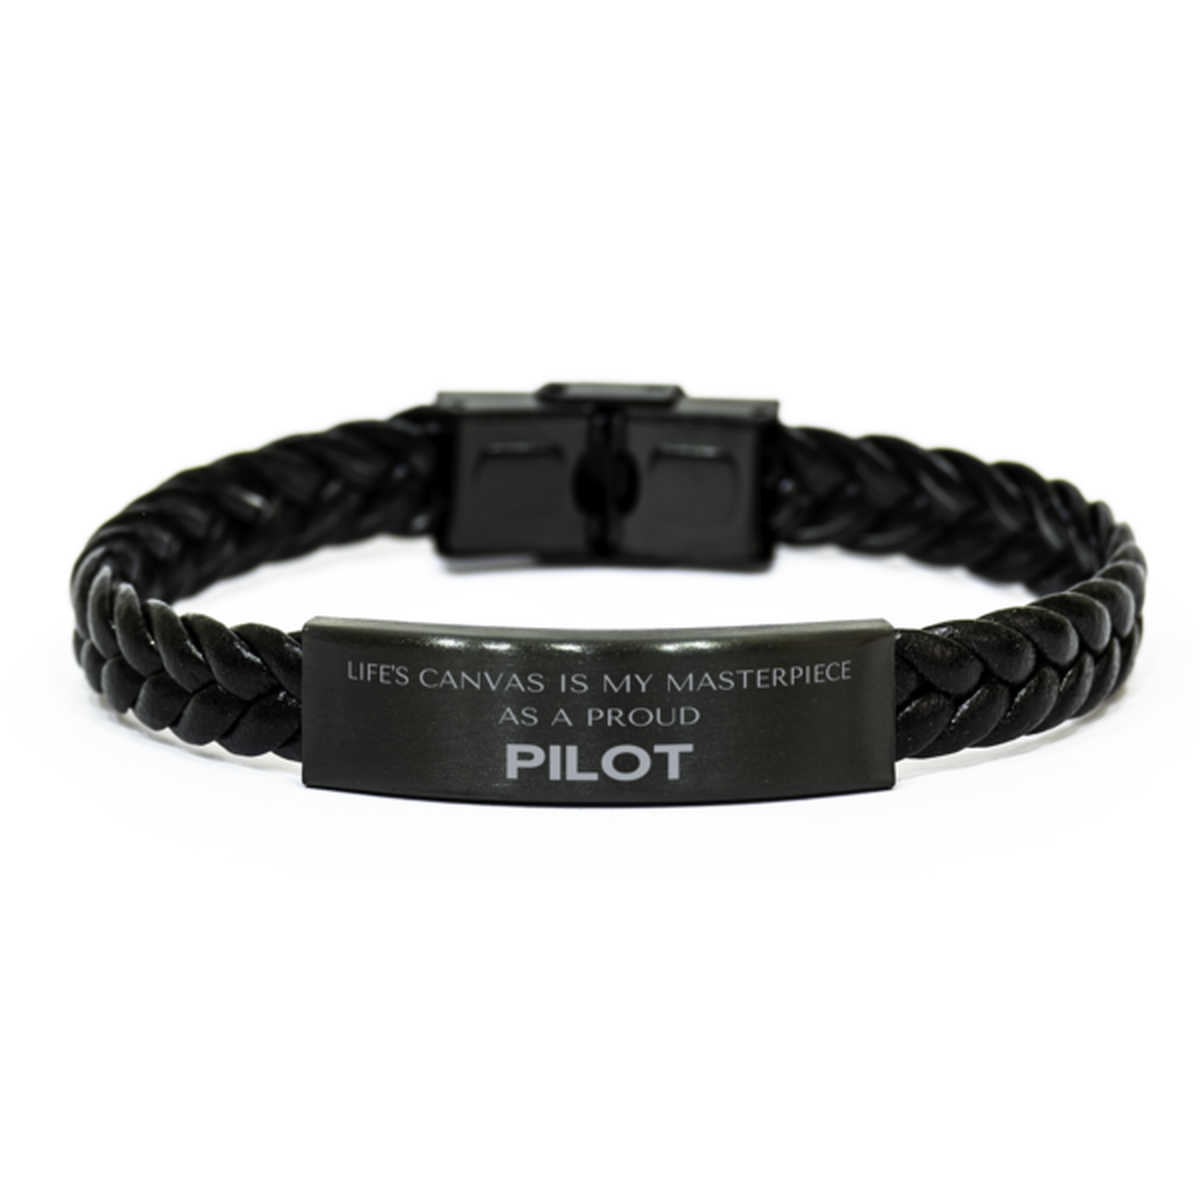 Proud Pilot Gifts, Life's canvas is my masterpiece, Epic Birthday Christmas Unique Braided Leather Bracelet For Pilot, Coworkers, Men, Women, Friends